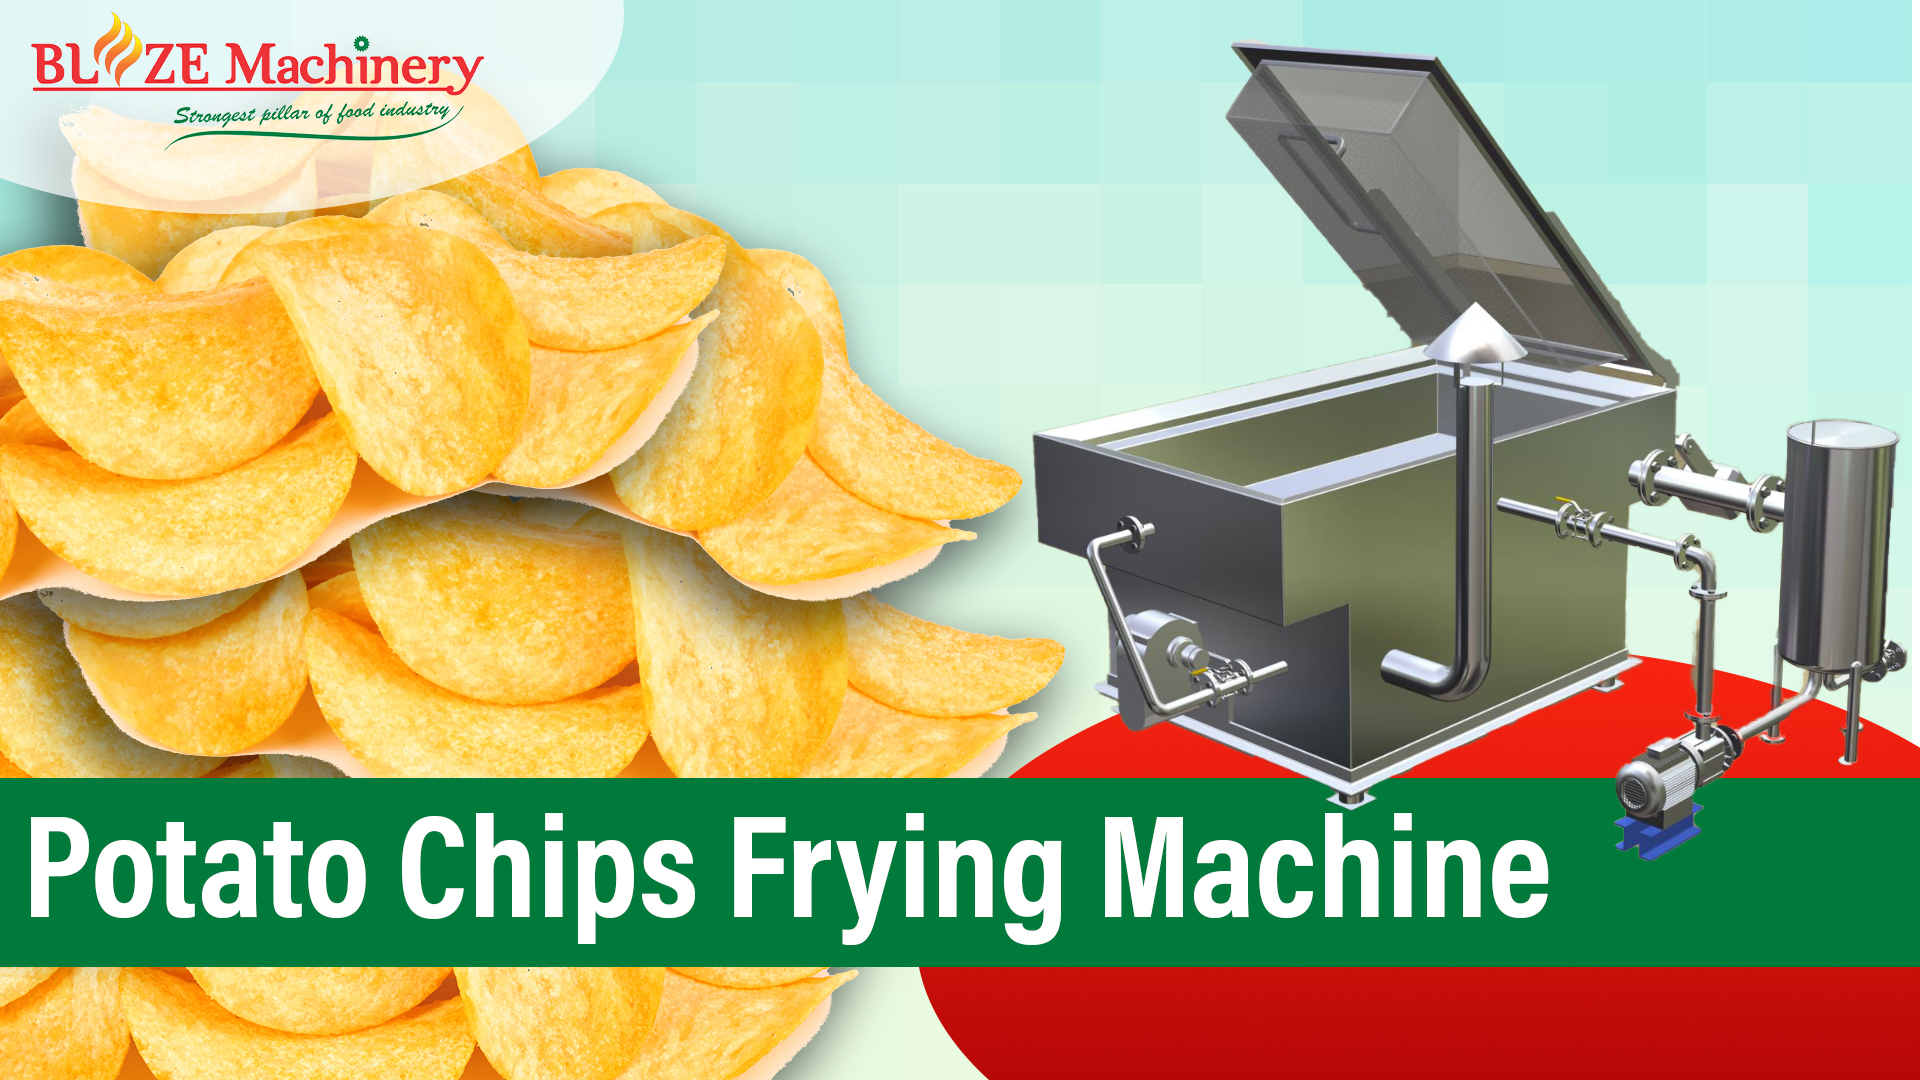 Heavy Duty Commercial 200 kg Potato Slicer Machine with 0.5HP Motor